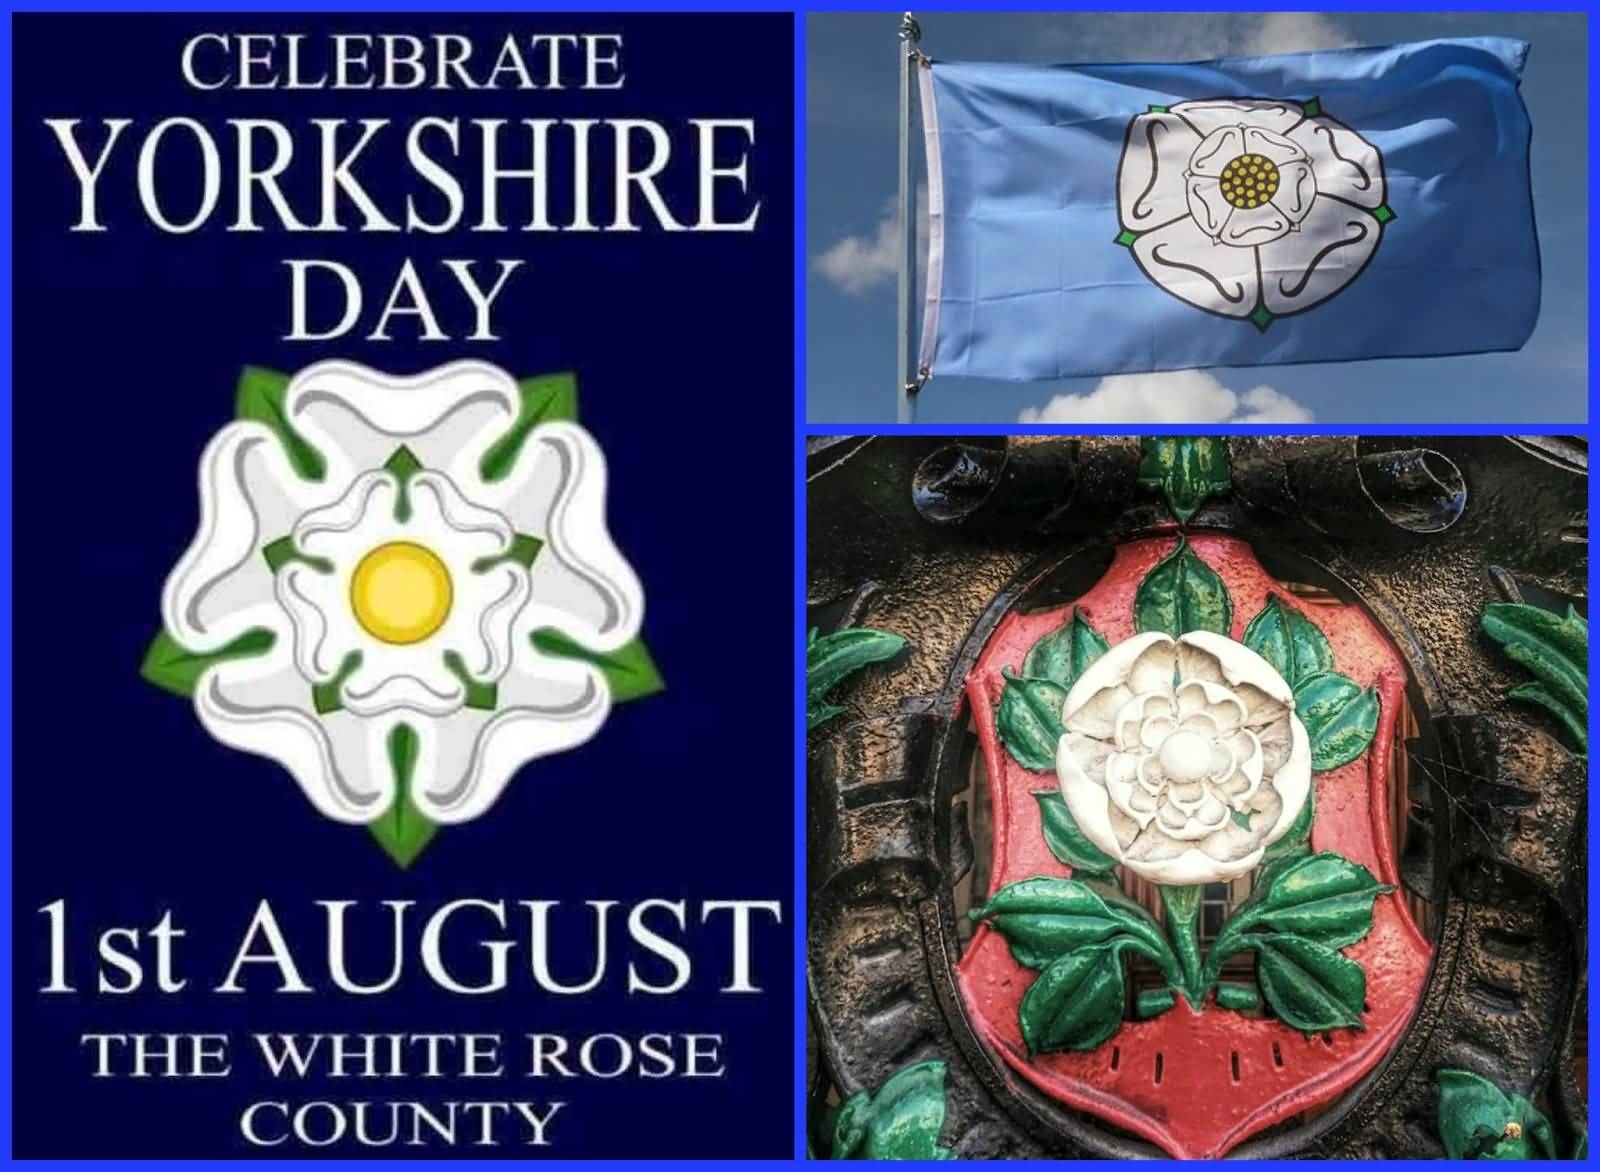 Celebrate Yorkshire Day 1st August The White Rose County